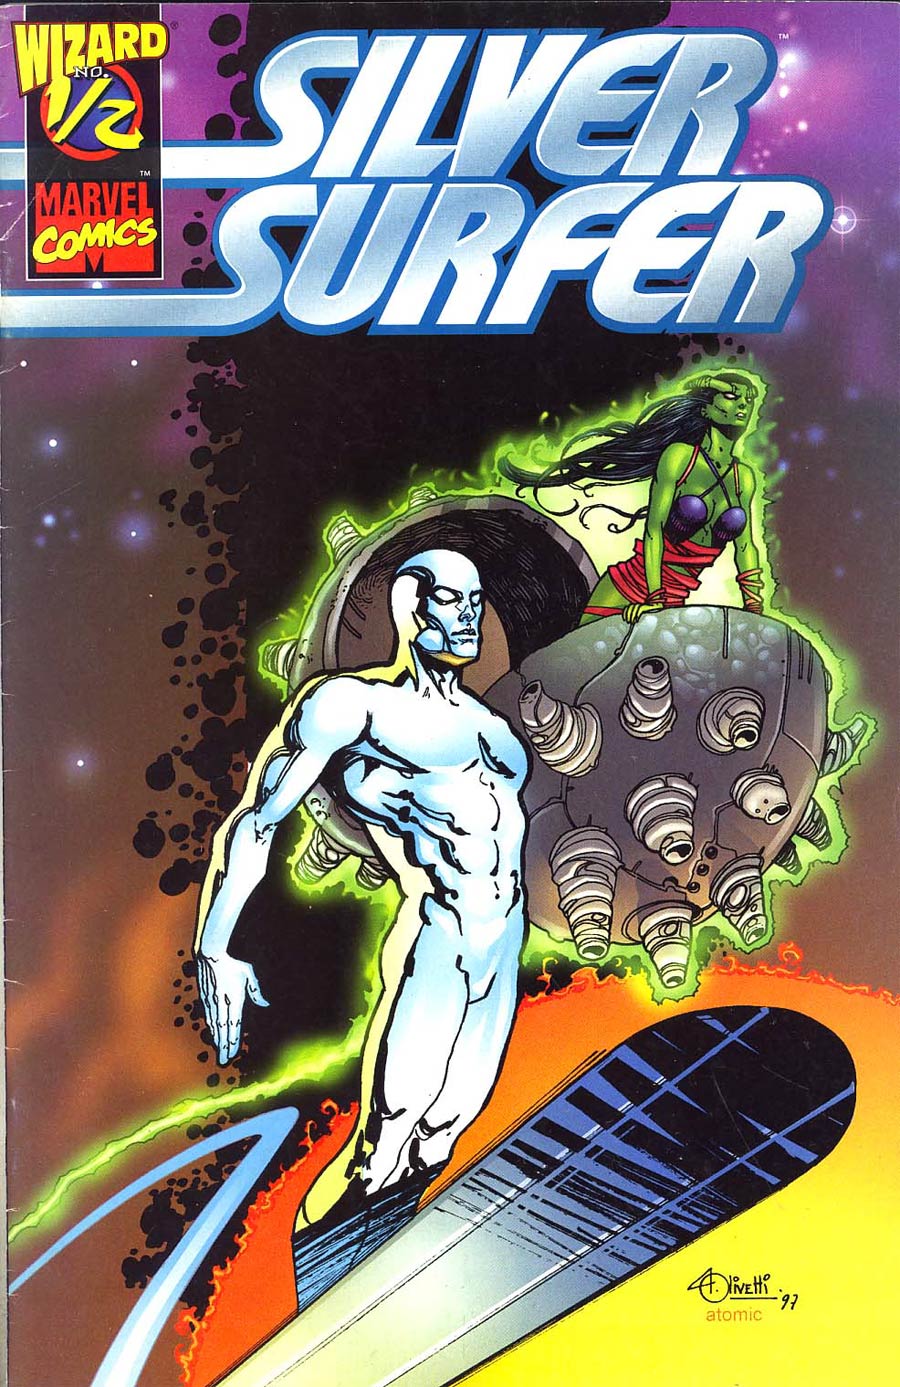 Silver Surfer Wizard #1/2 Without Certificate